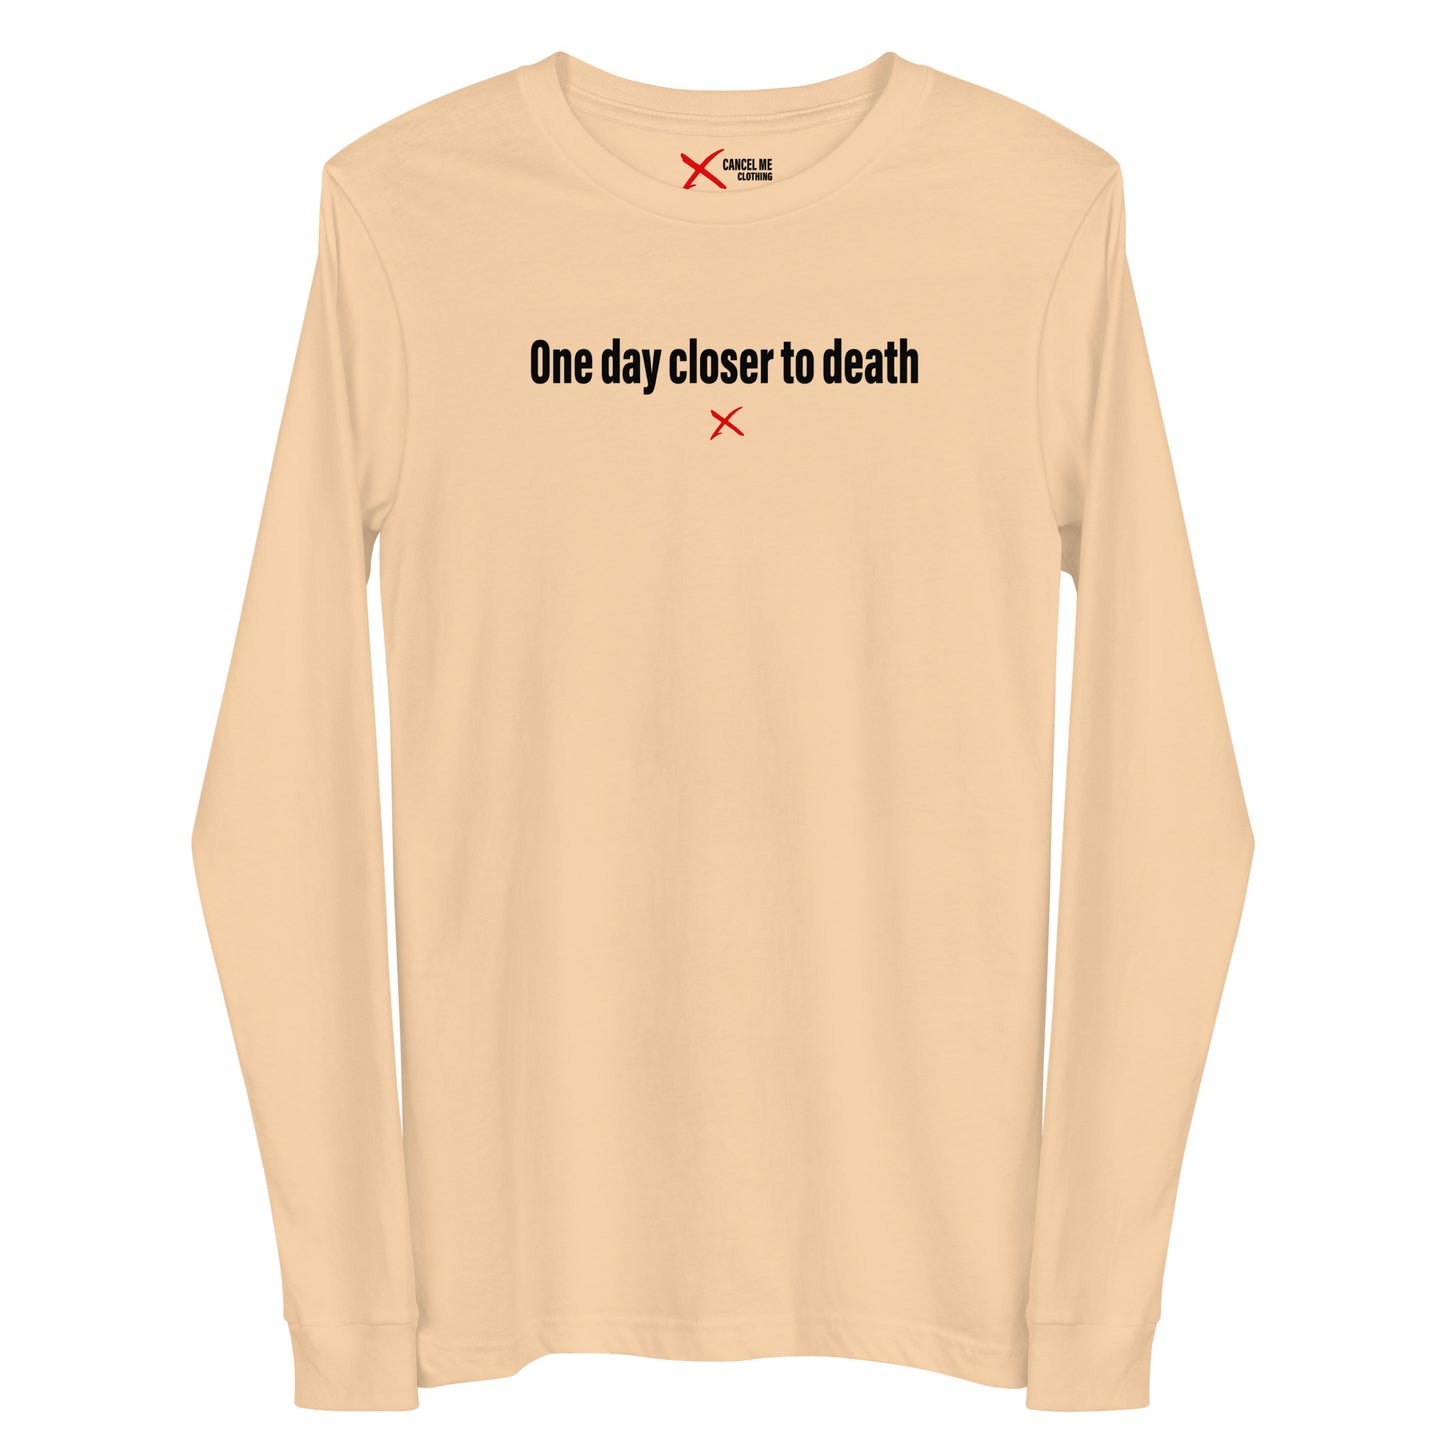 One day closer to death - Longsleeve